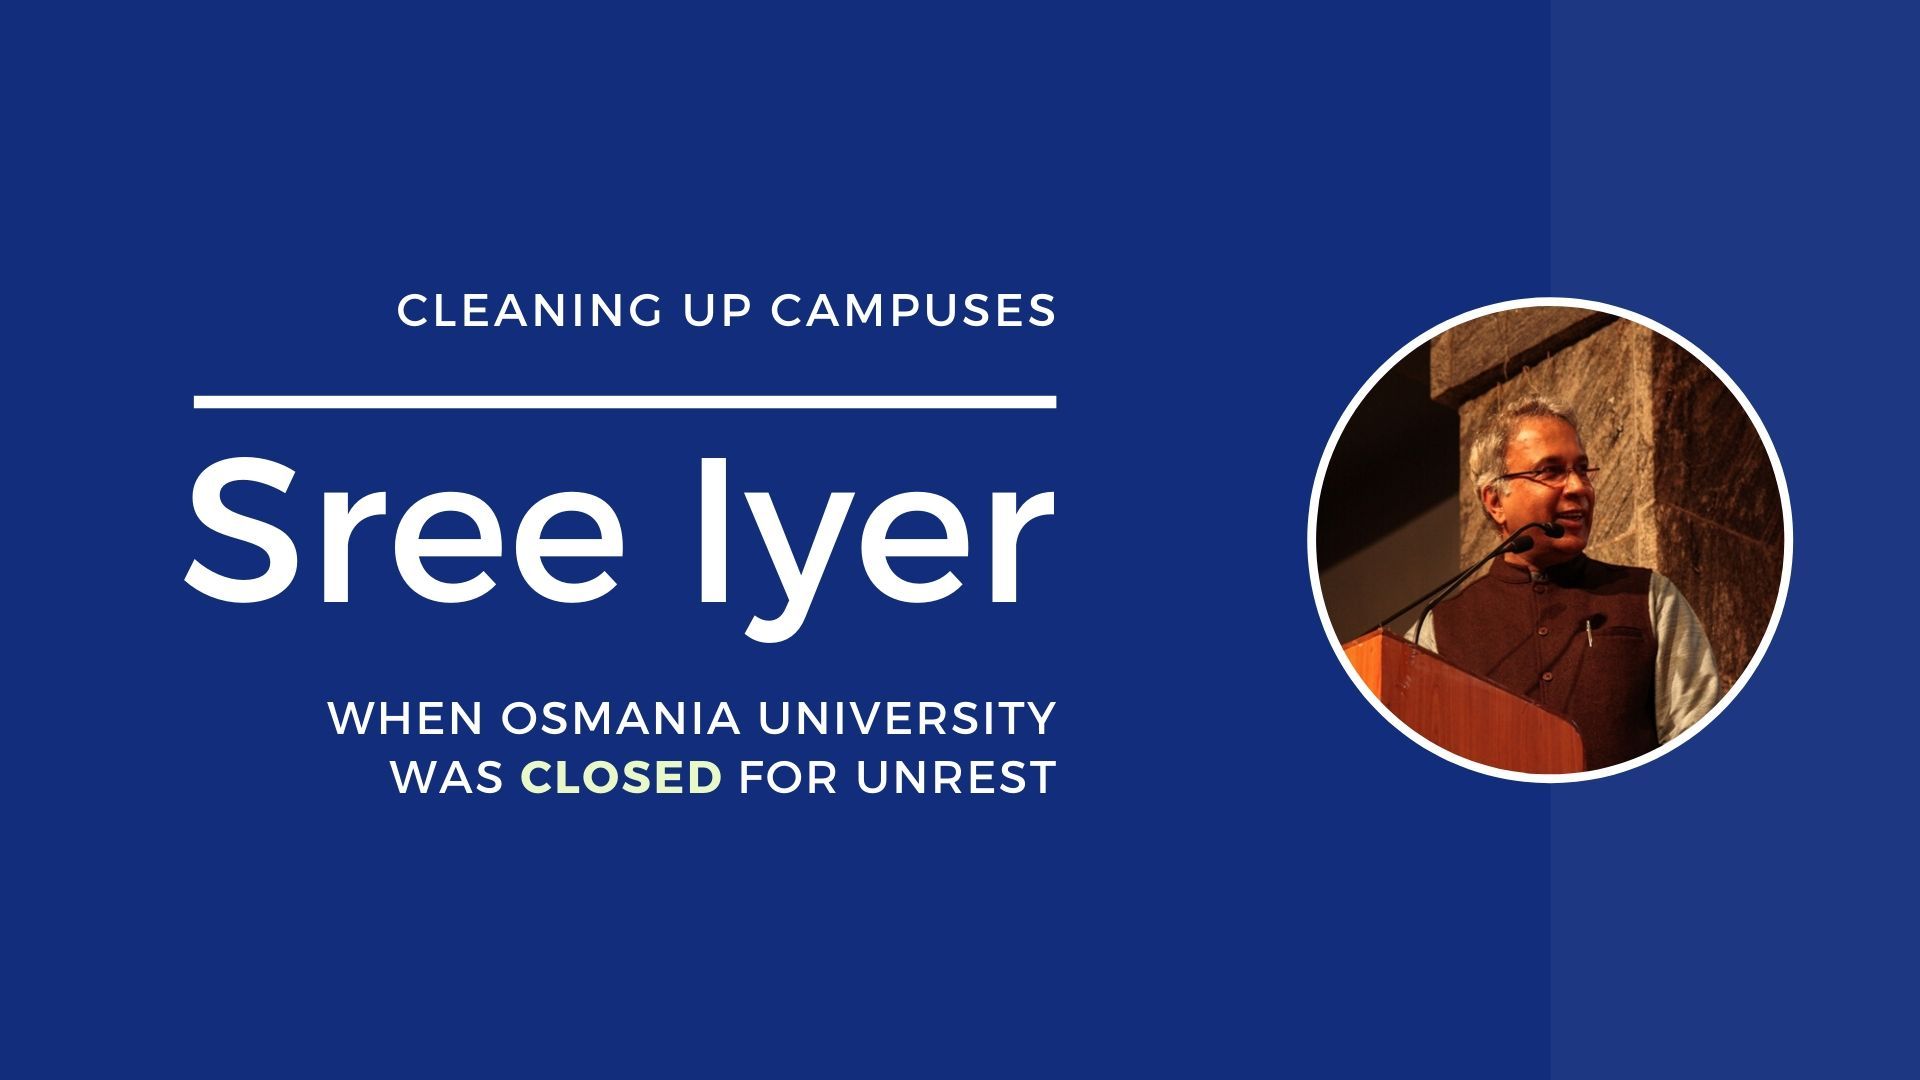 Students of Engineering College in Osmania University were agitating against the introduction of capitation fee colleges in AP. The then govt. of Congress, led by Chenna Reddy closed down the campus for months and forged ahead, says Sree Iyer.